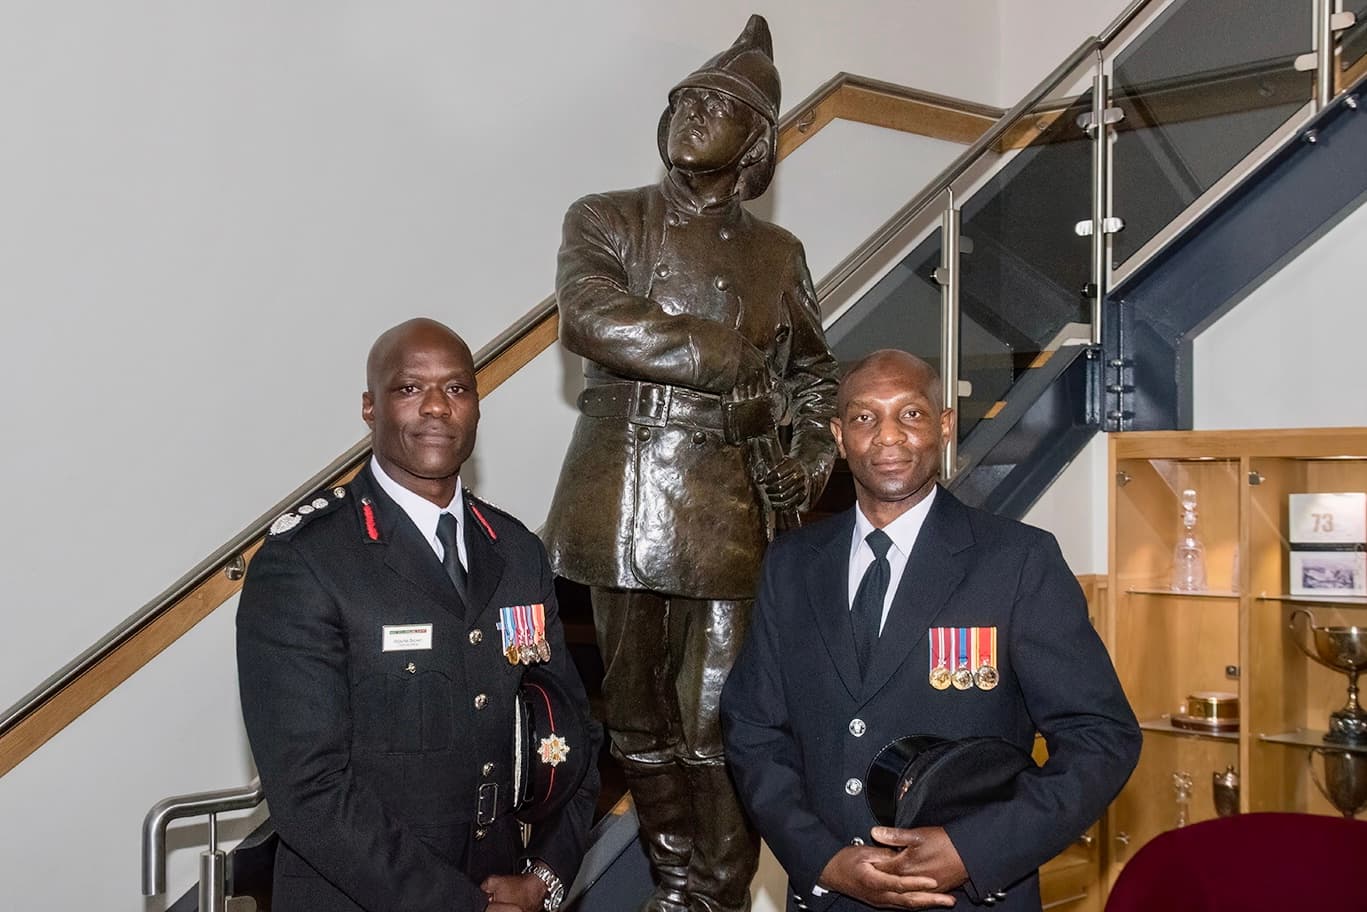 Chief Fire Officer and a firefighter, both in smart uniforms and wearing medals, stand in front of a bronze statue of a firefighter